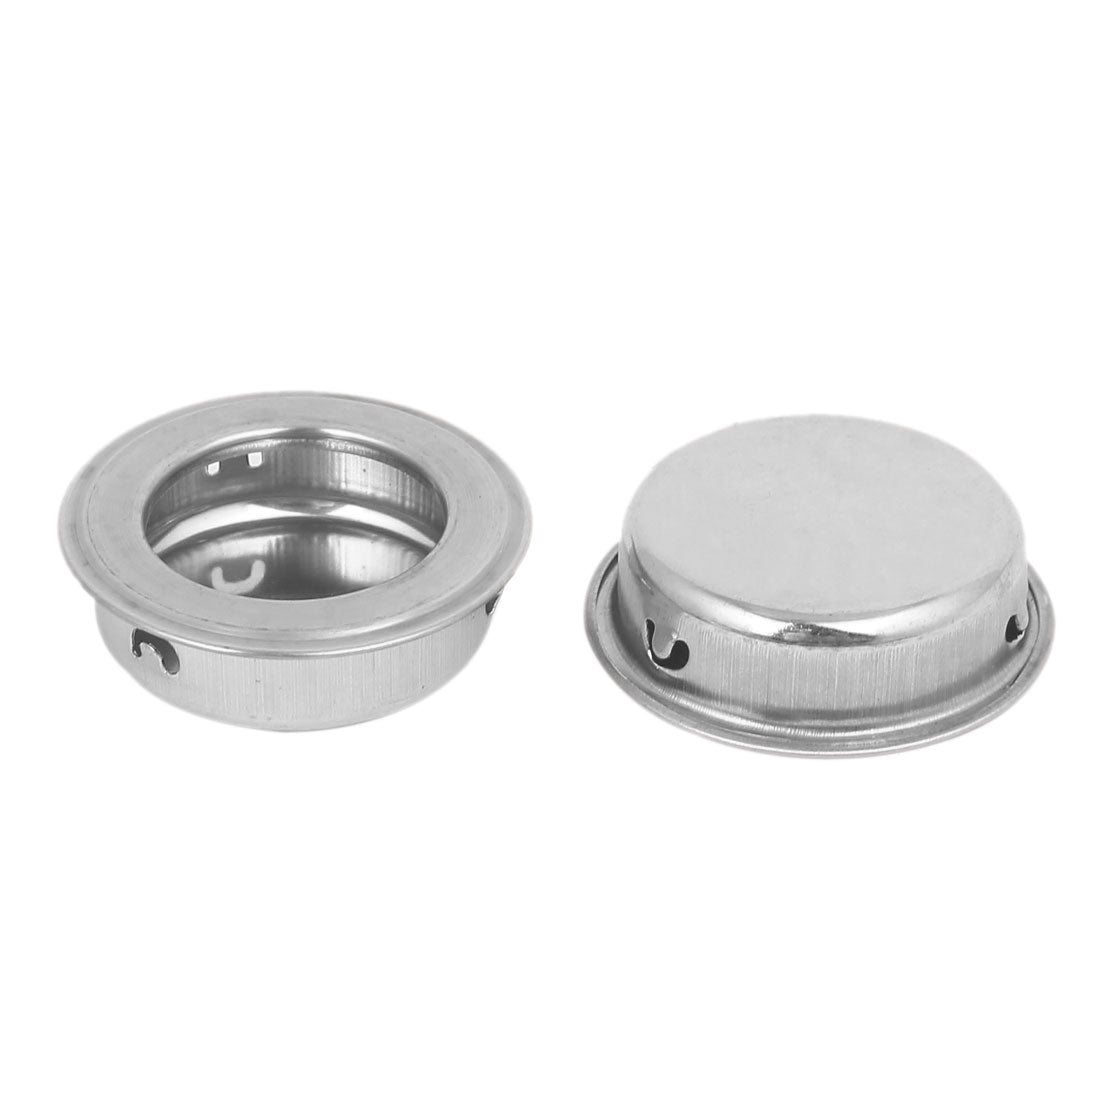 uxcell Uxcell Drawer 304 Stainless Steel Embedded Round Flush Pull Handle 35mm Diameter 10pcs